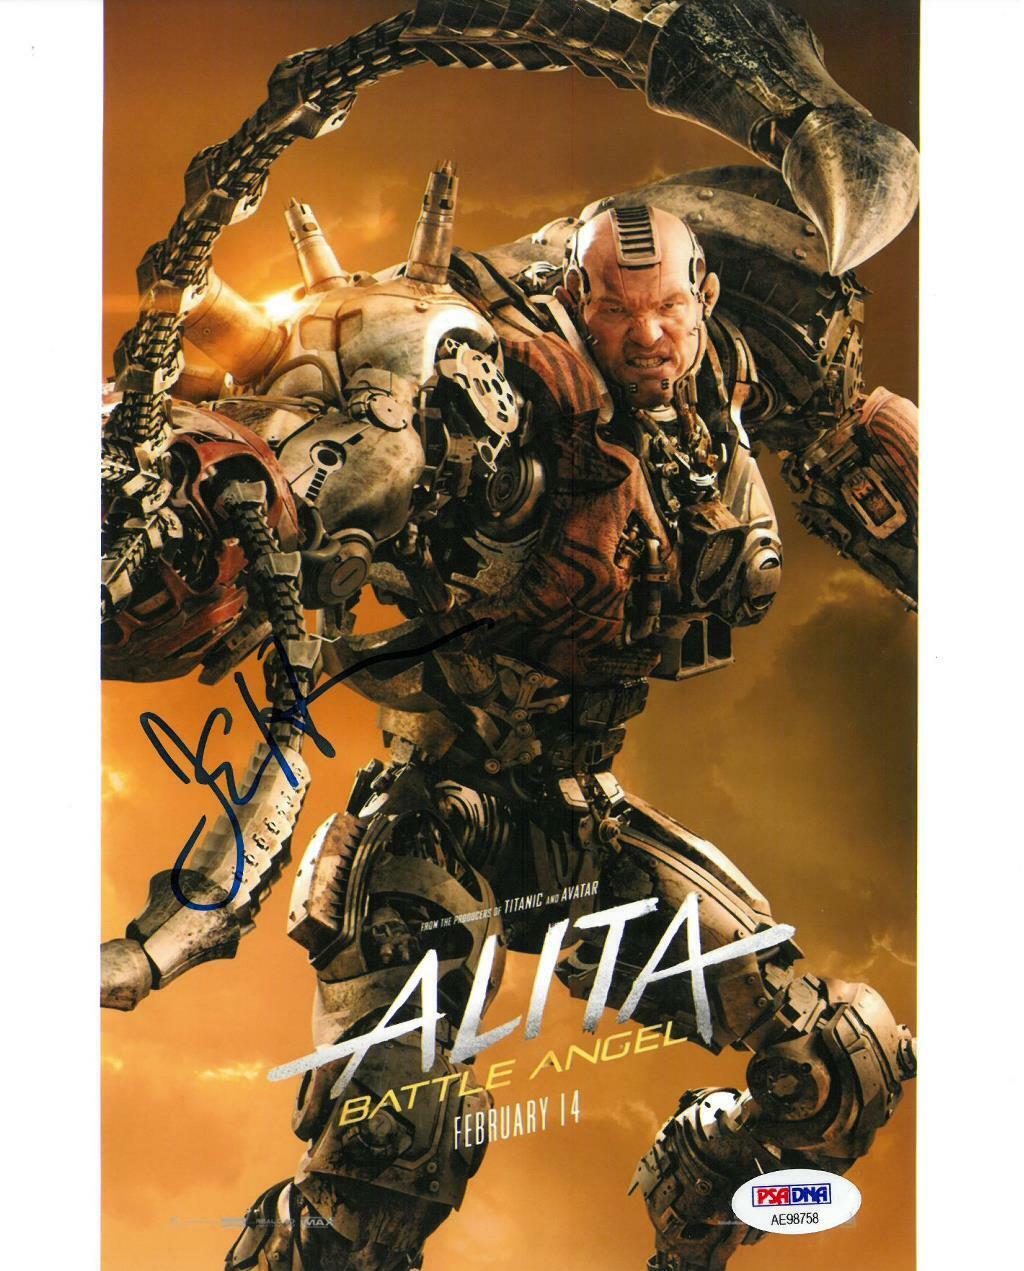 Jackie Earle Haley Signed Alita Battle Angel Auto 8x10 Photo Poster painting PSA/DNA #AE98758